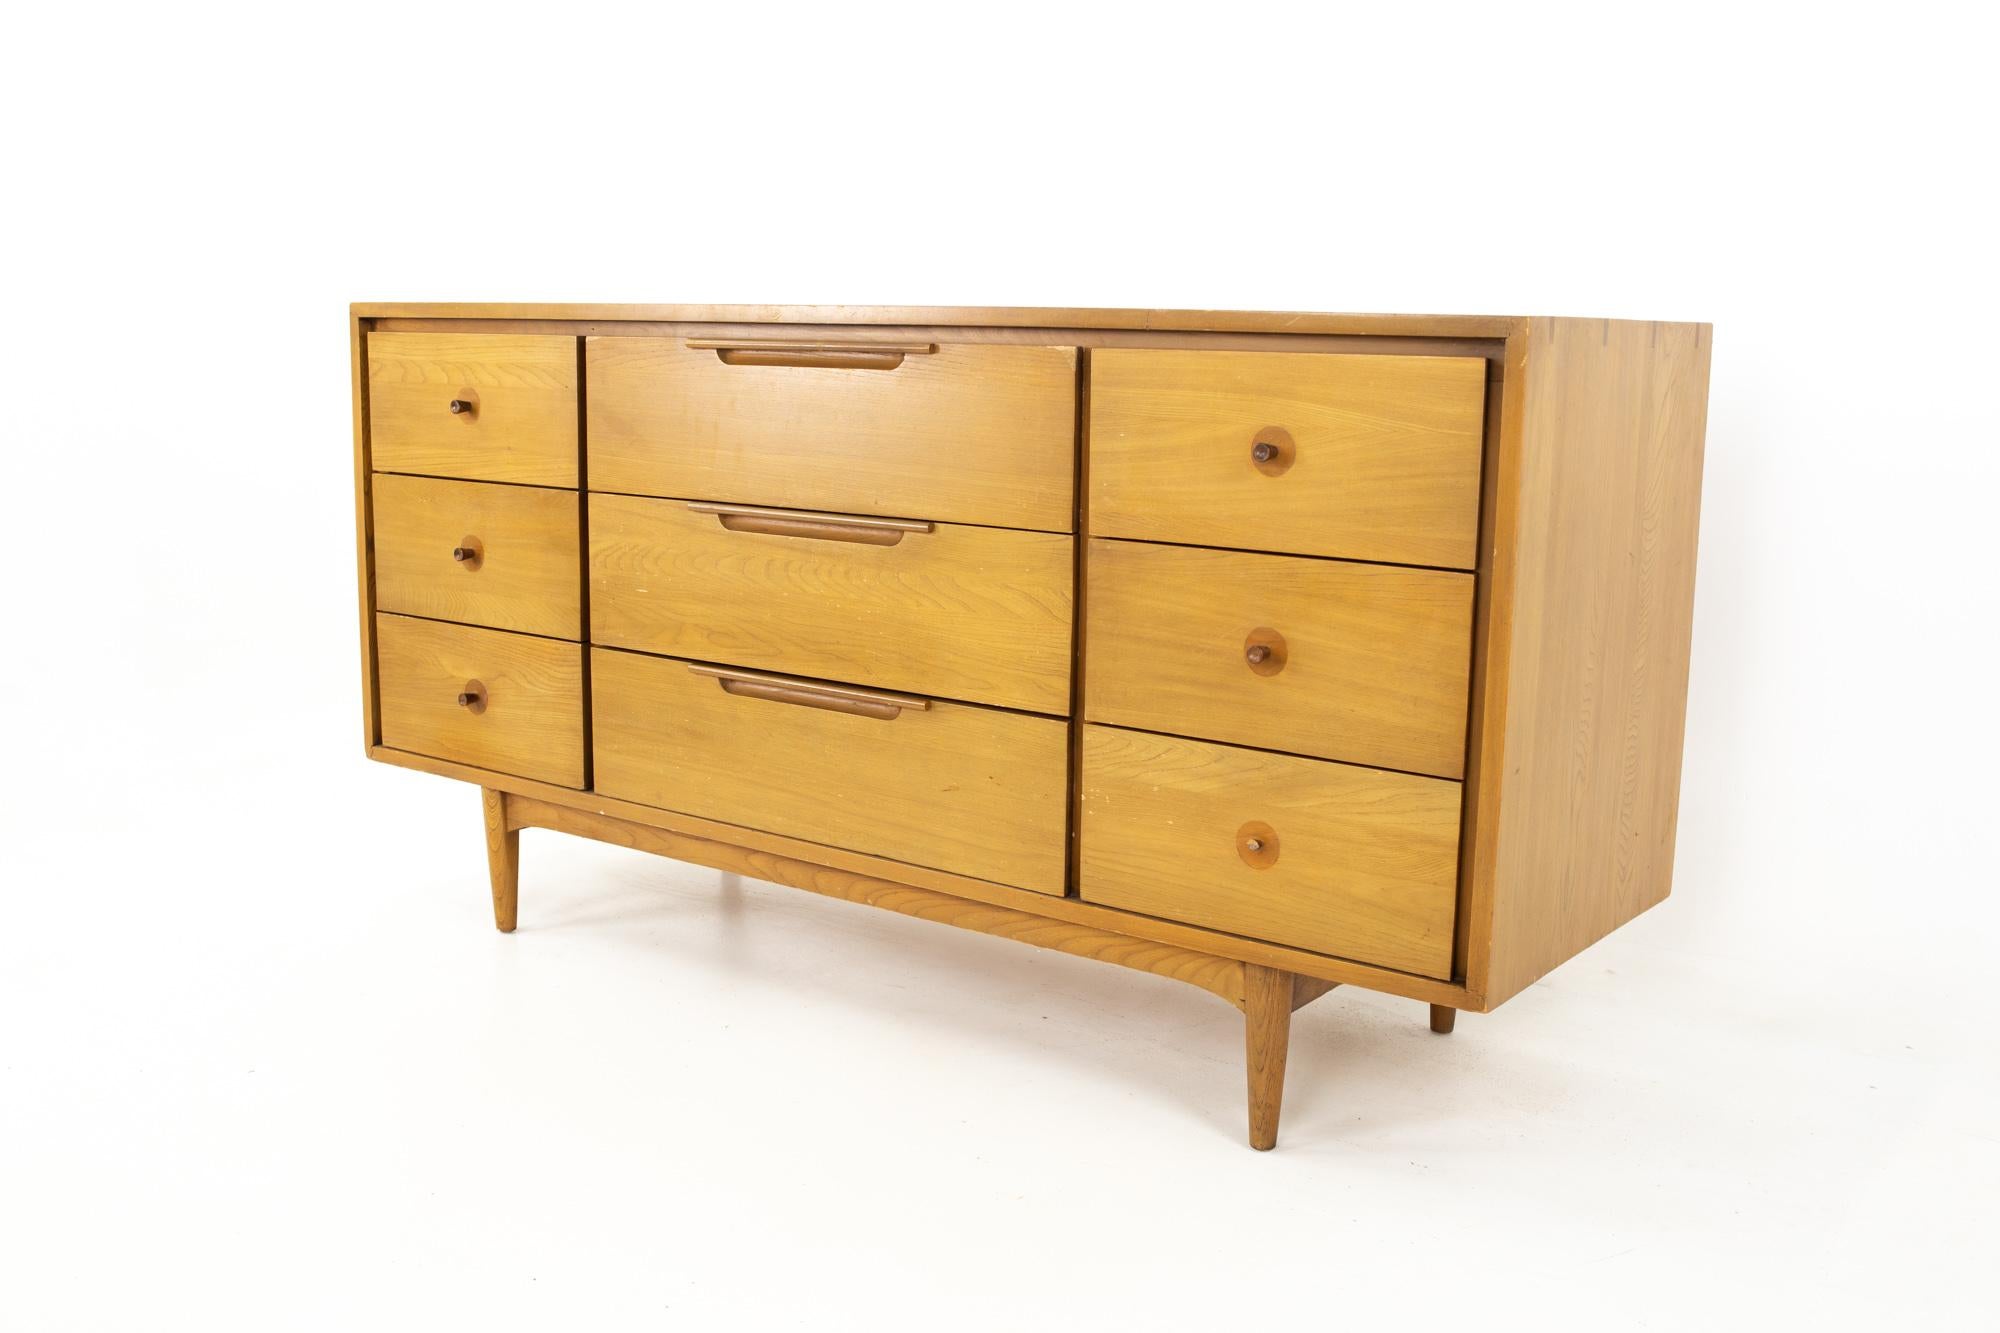 Dillingham Samara Mid Century walnut 9 drawer lowboy dresser
Dresser measures: 60 wide x 18.5 deep x 30.25 inches high

All pieces of furniture can be had in what we call restored vintage condition. That means the piece is restored upon purchase so